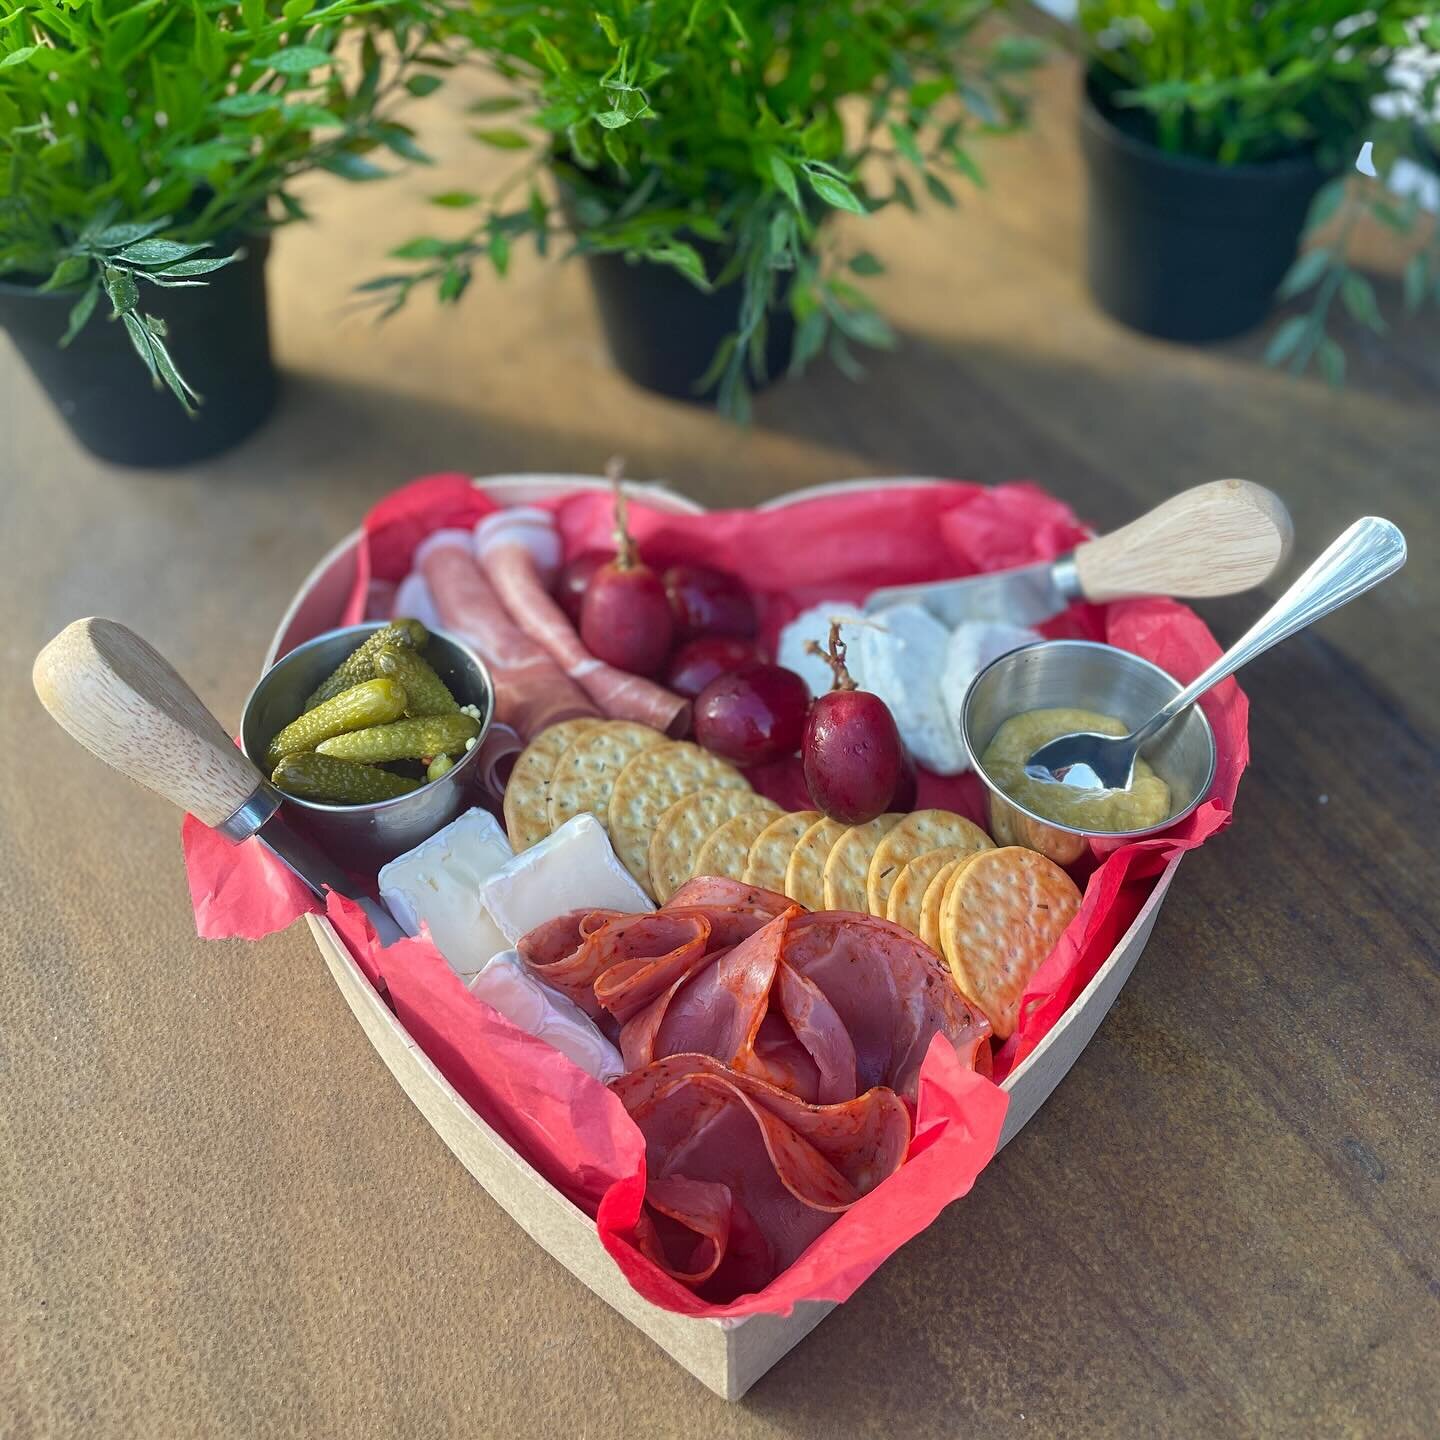 Try our limited-time-only Heart Charcuterie, board Valentine&rsquo;s Day only❣️

🥂Pair with a bottle of Ros&eacute; or Prosecco for 
$37.&deg;&deg; 

#shadrachsfieryfurnace #pizza #personalpies #madetoorder #custom #brickoven #familyowned #local #gi